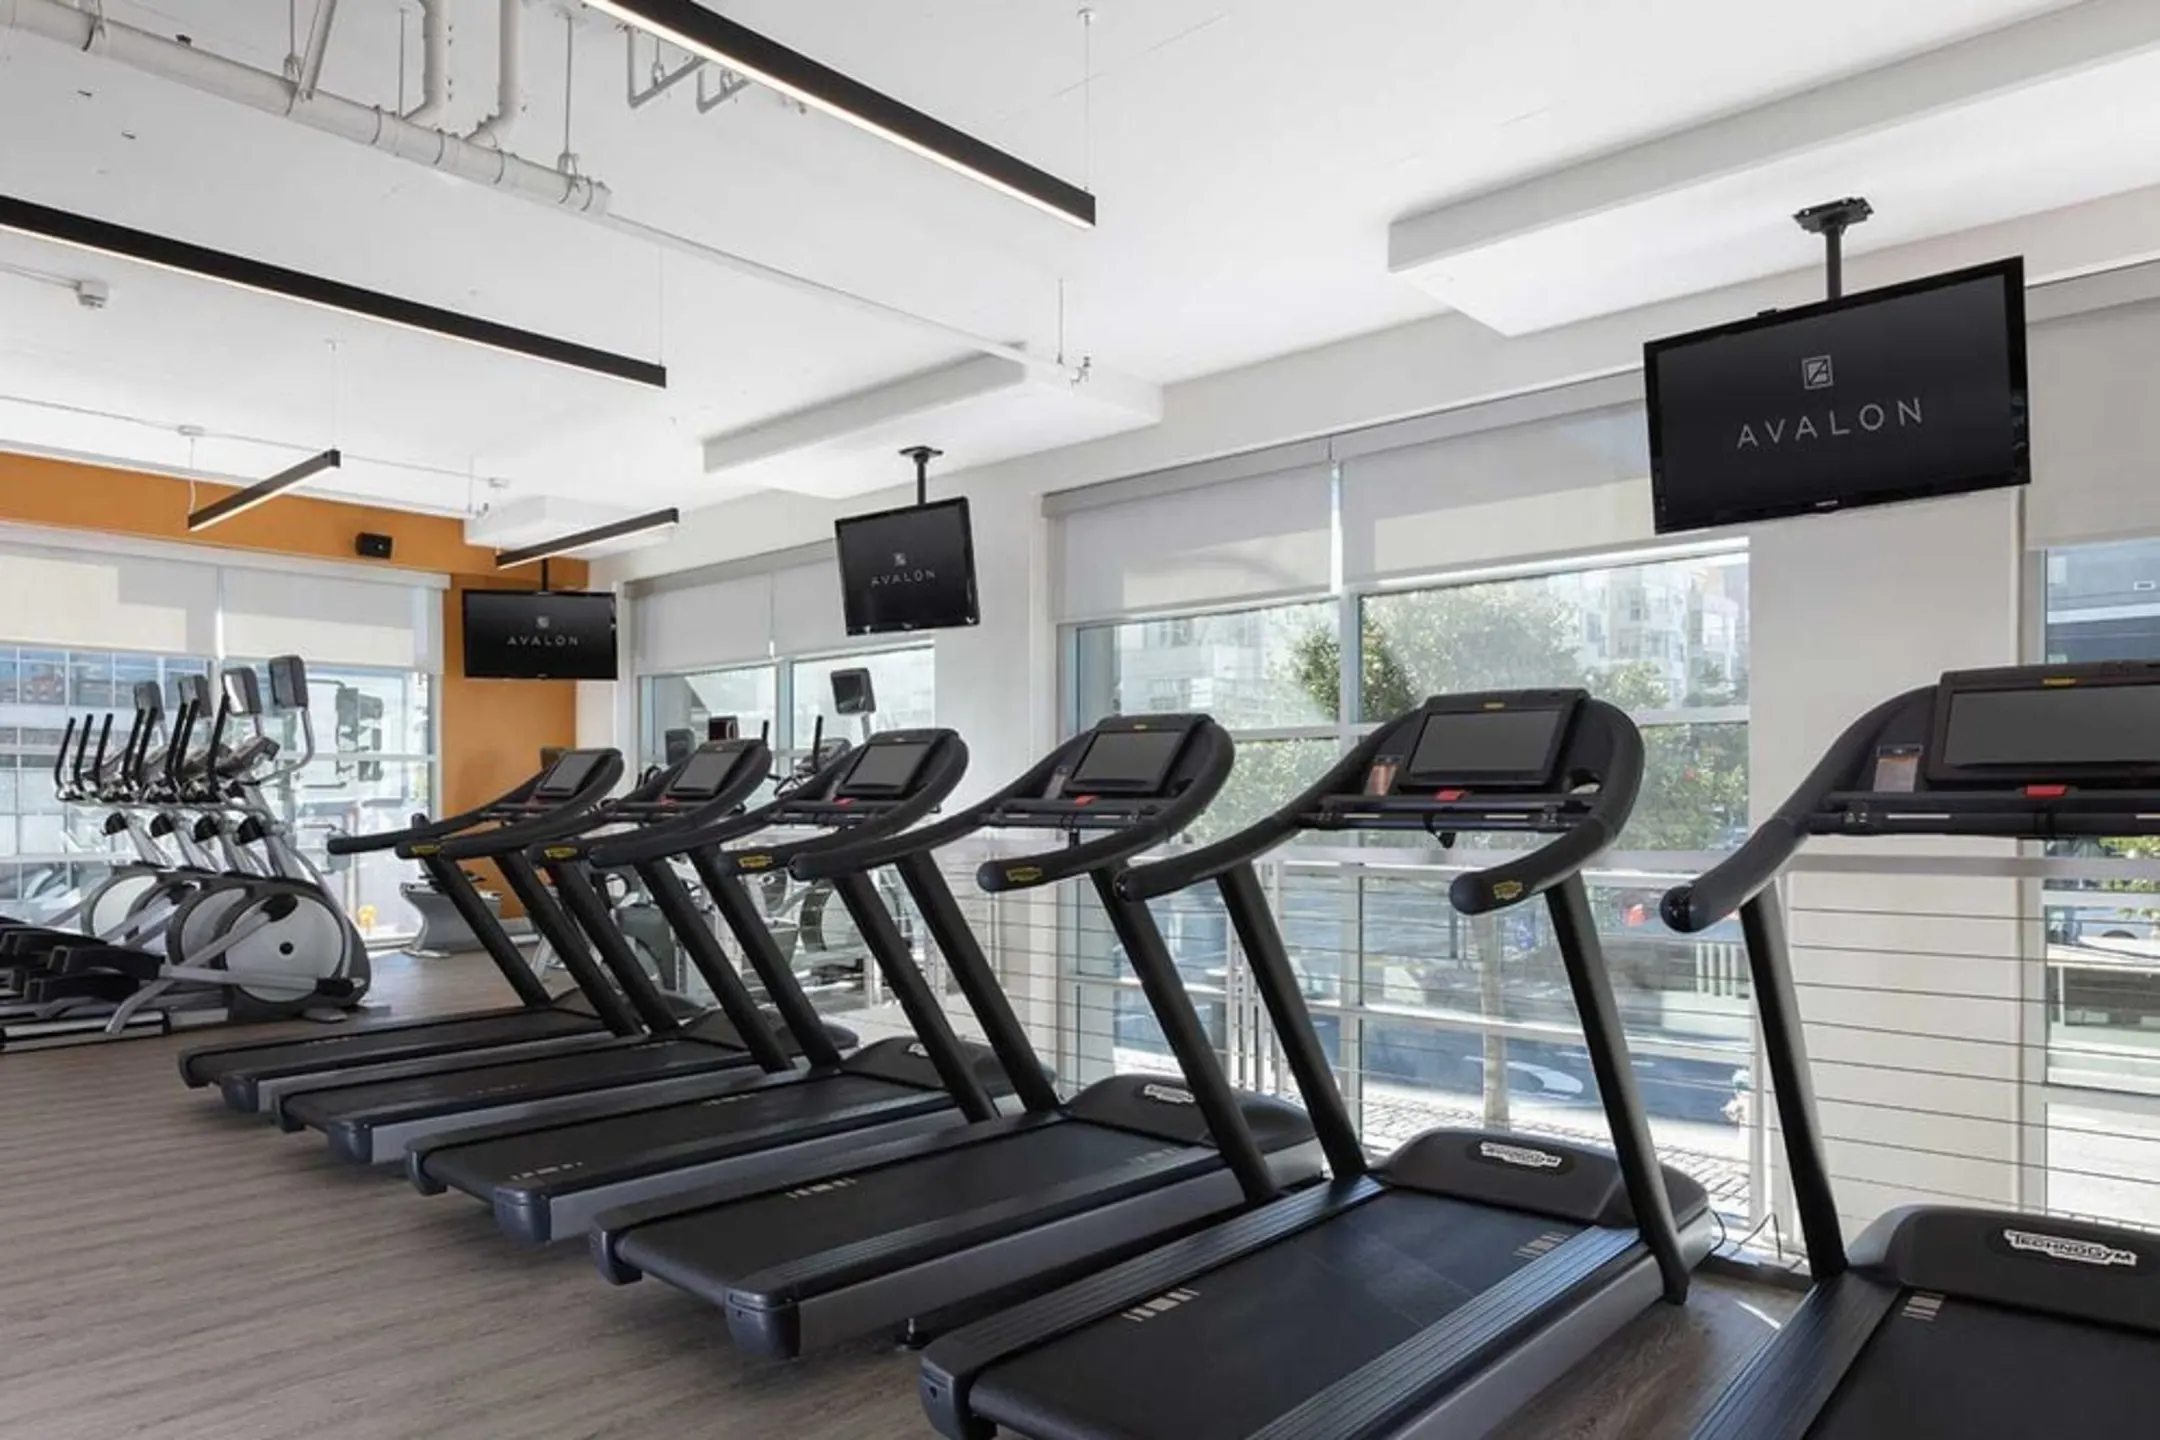 Fitness Weight Room - Avalon Mission Bay - San Francisco, CA